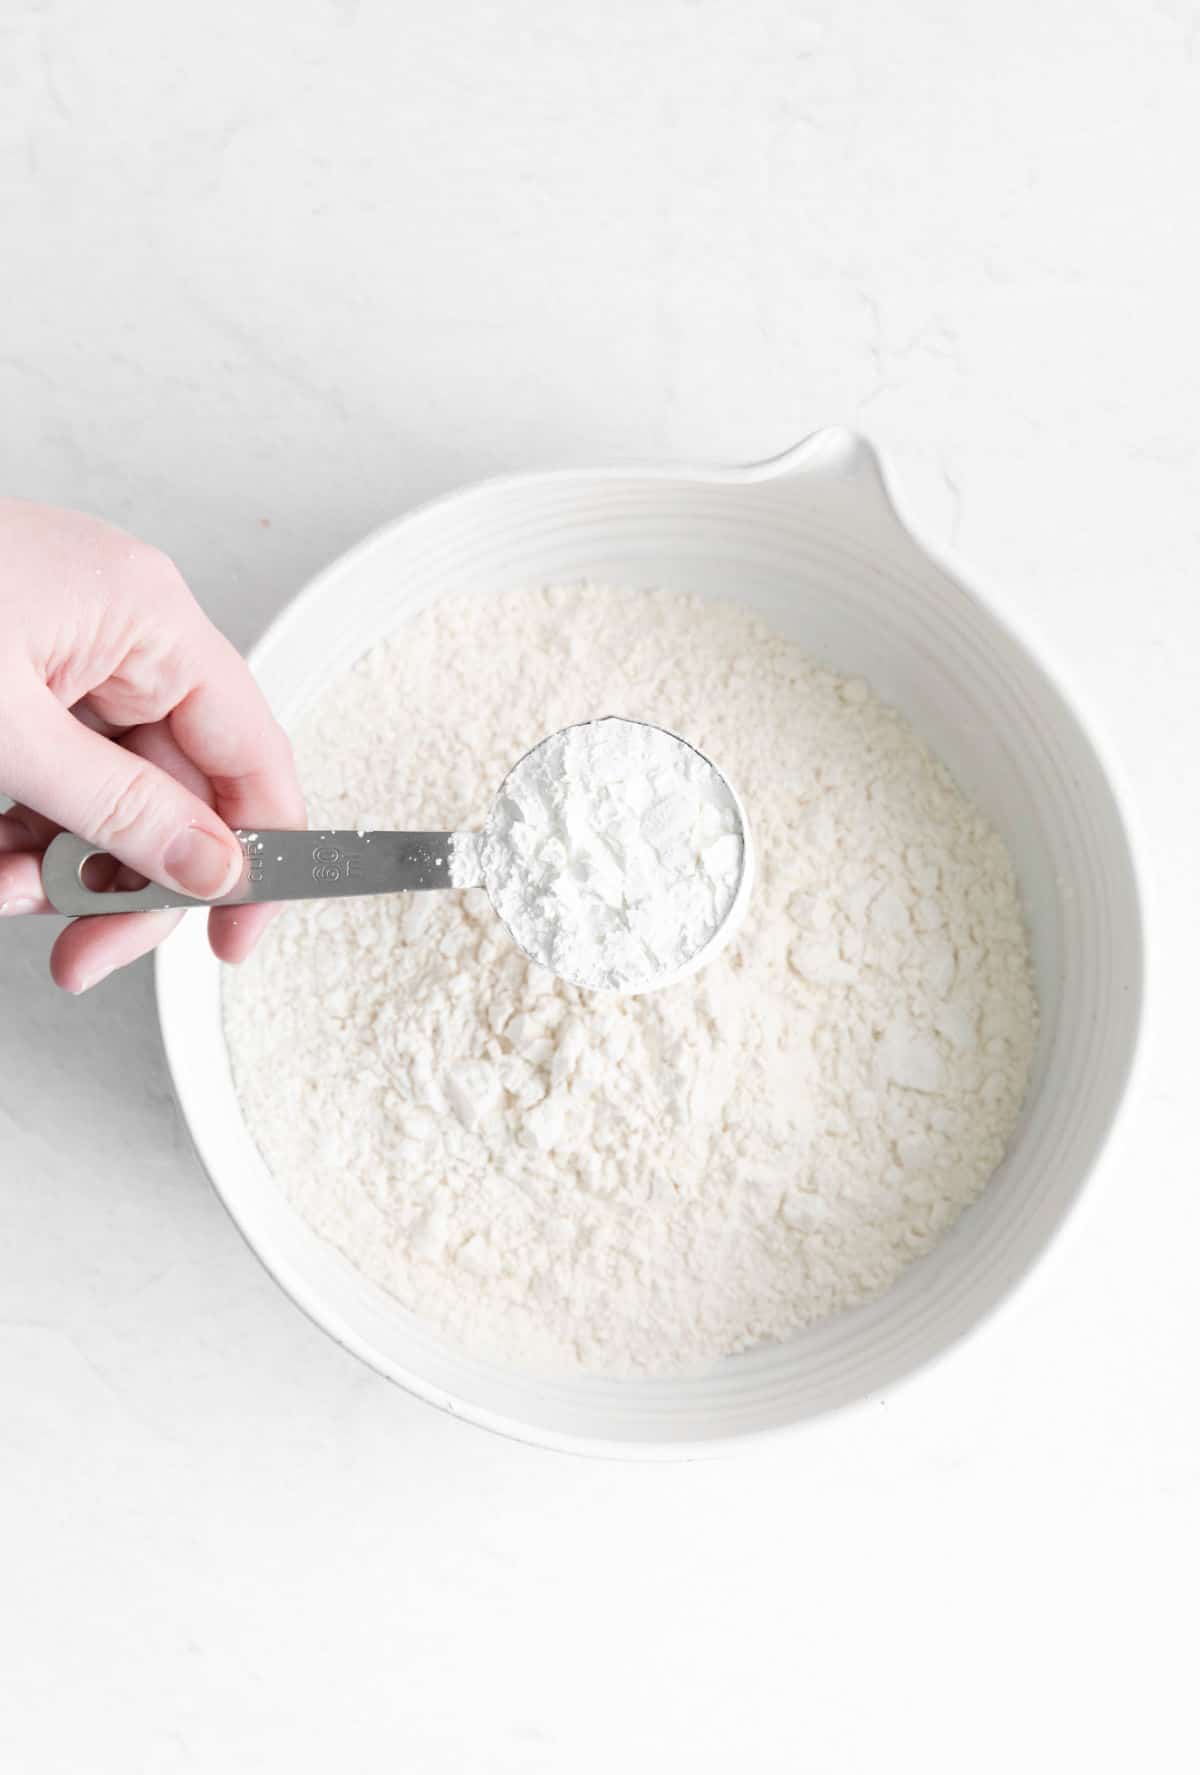 Measuring spoon removing flour from a bowl of flour.